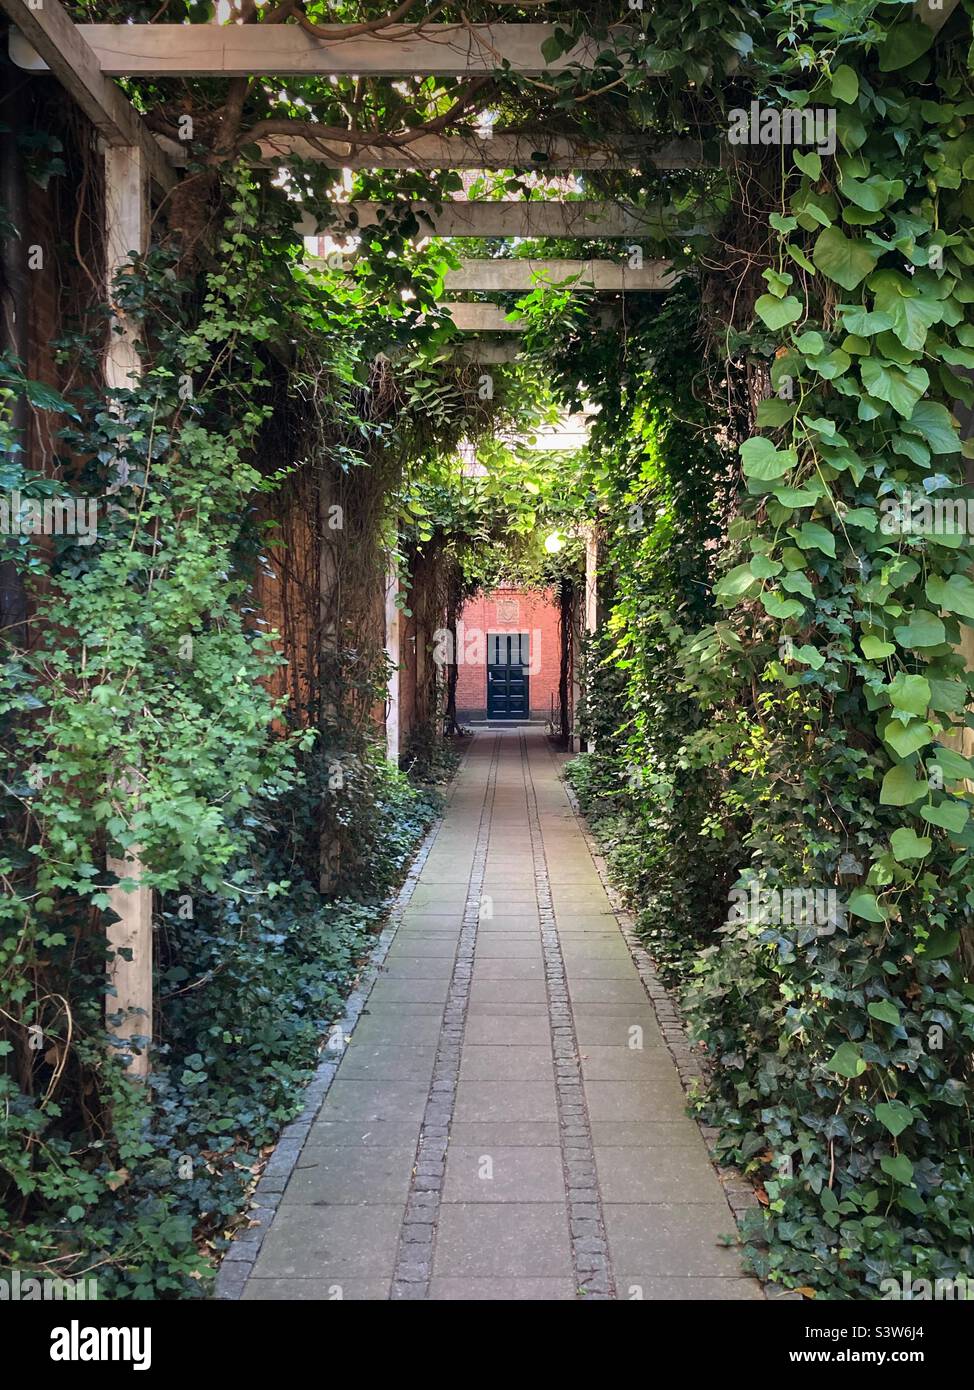 A planted entrance Passage to a house in Copenhagen Stock Photo